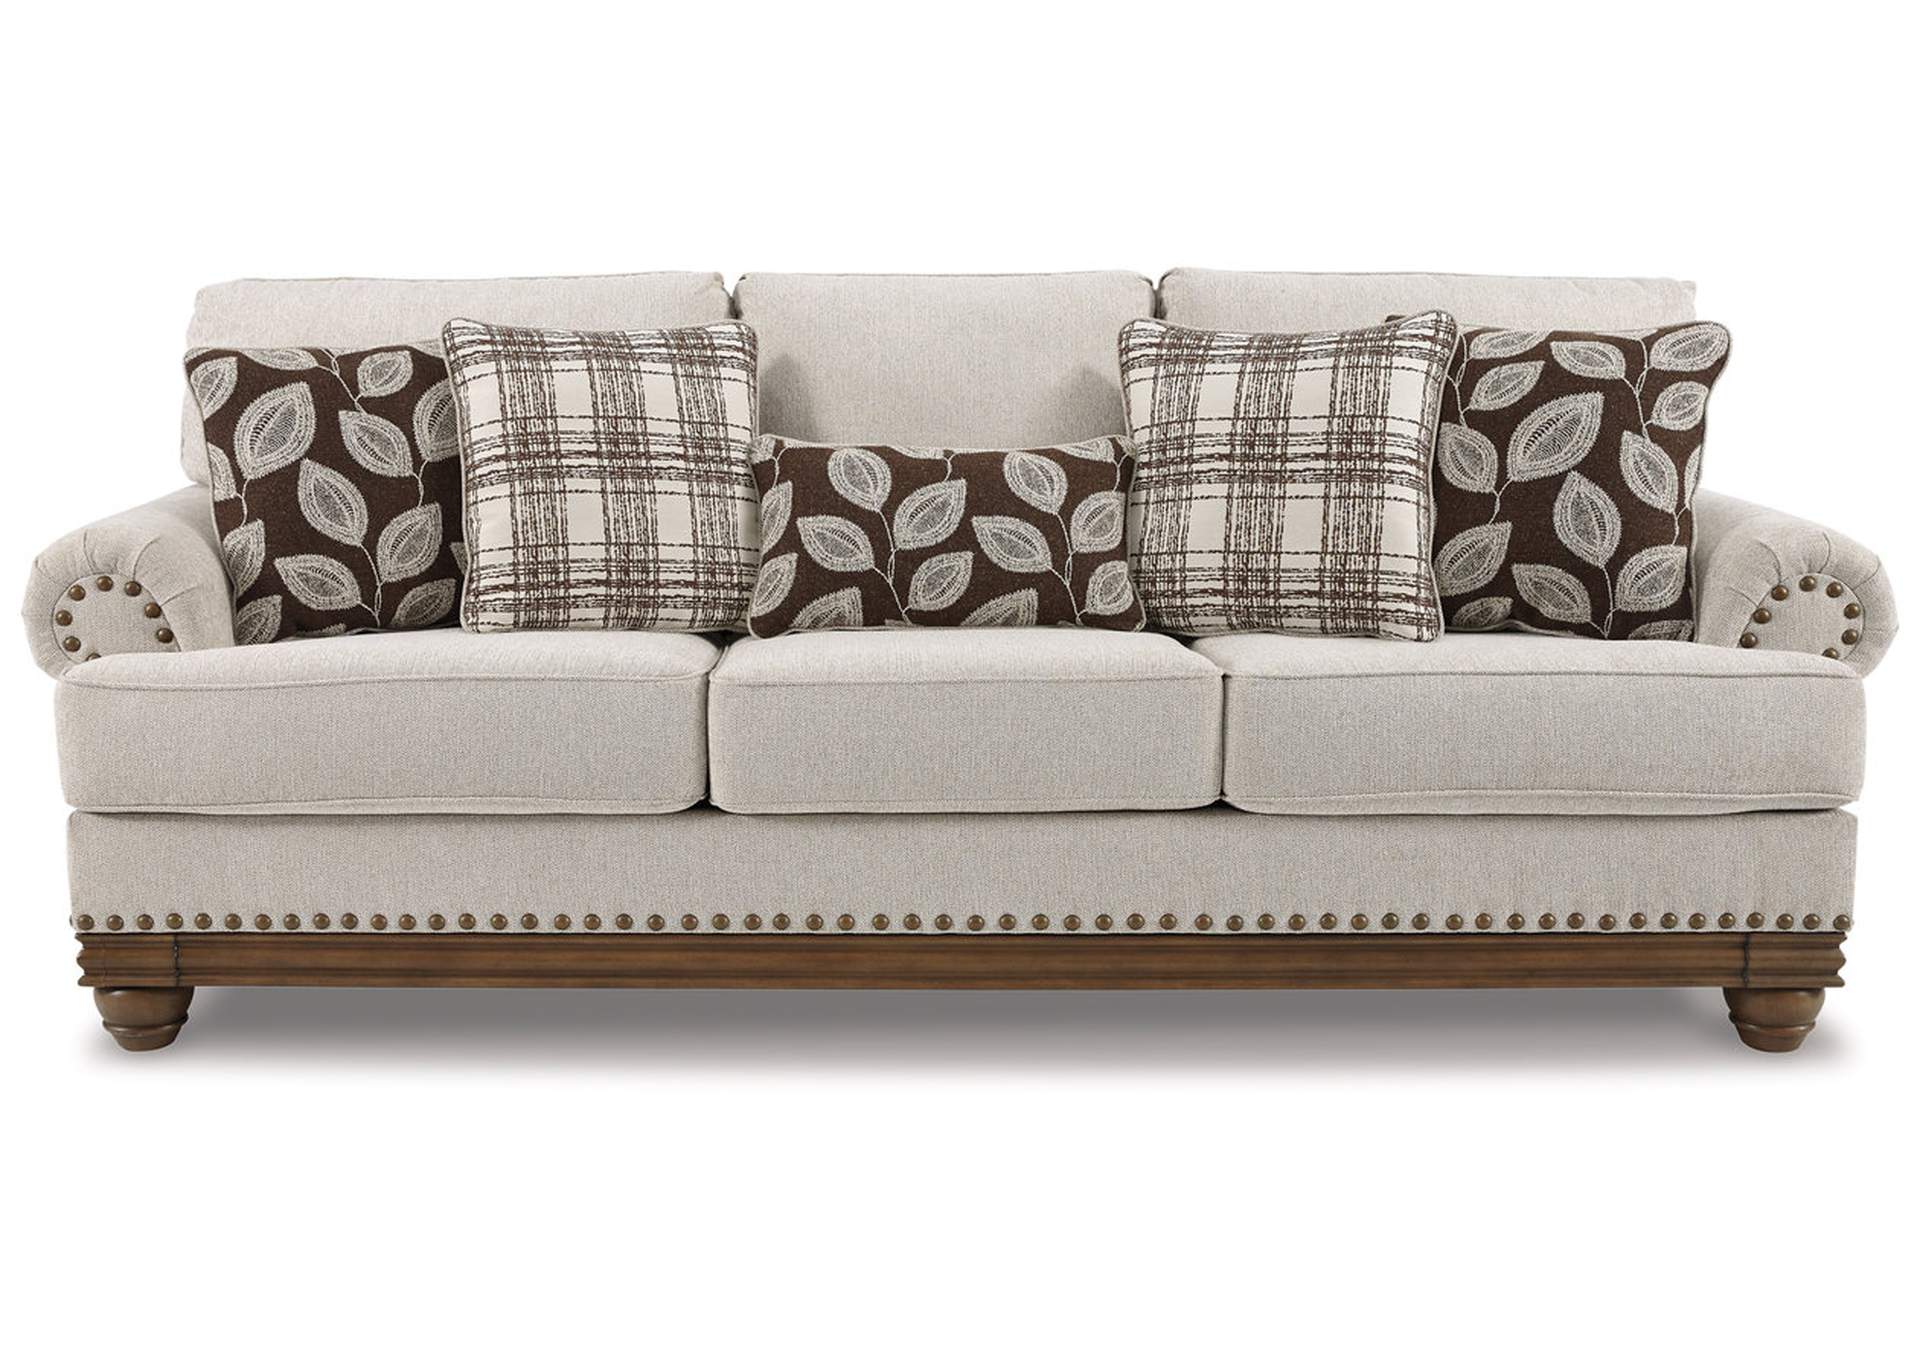 Harleson Sofa and Loveseat,Signature Design By Ashley